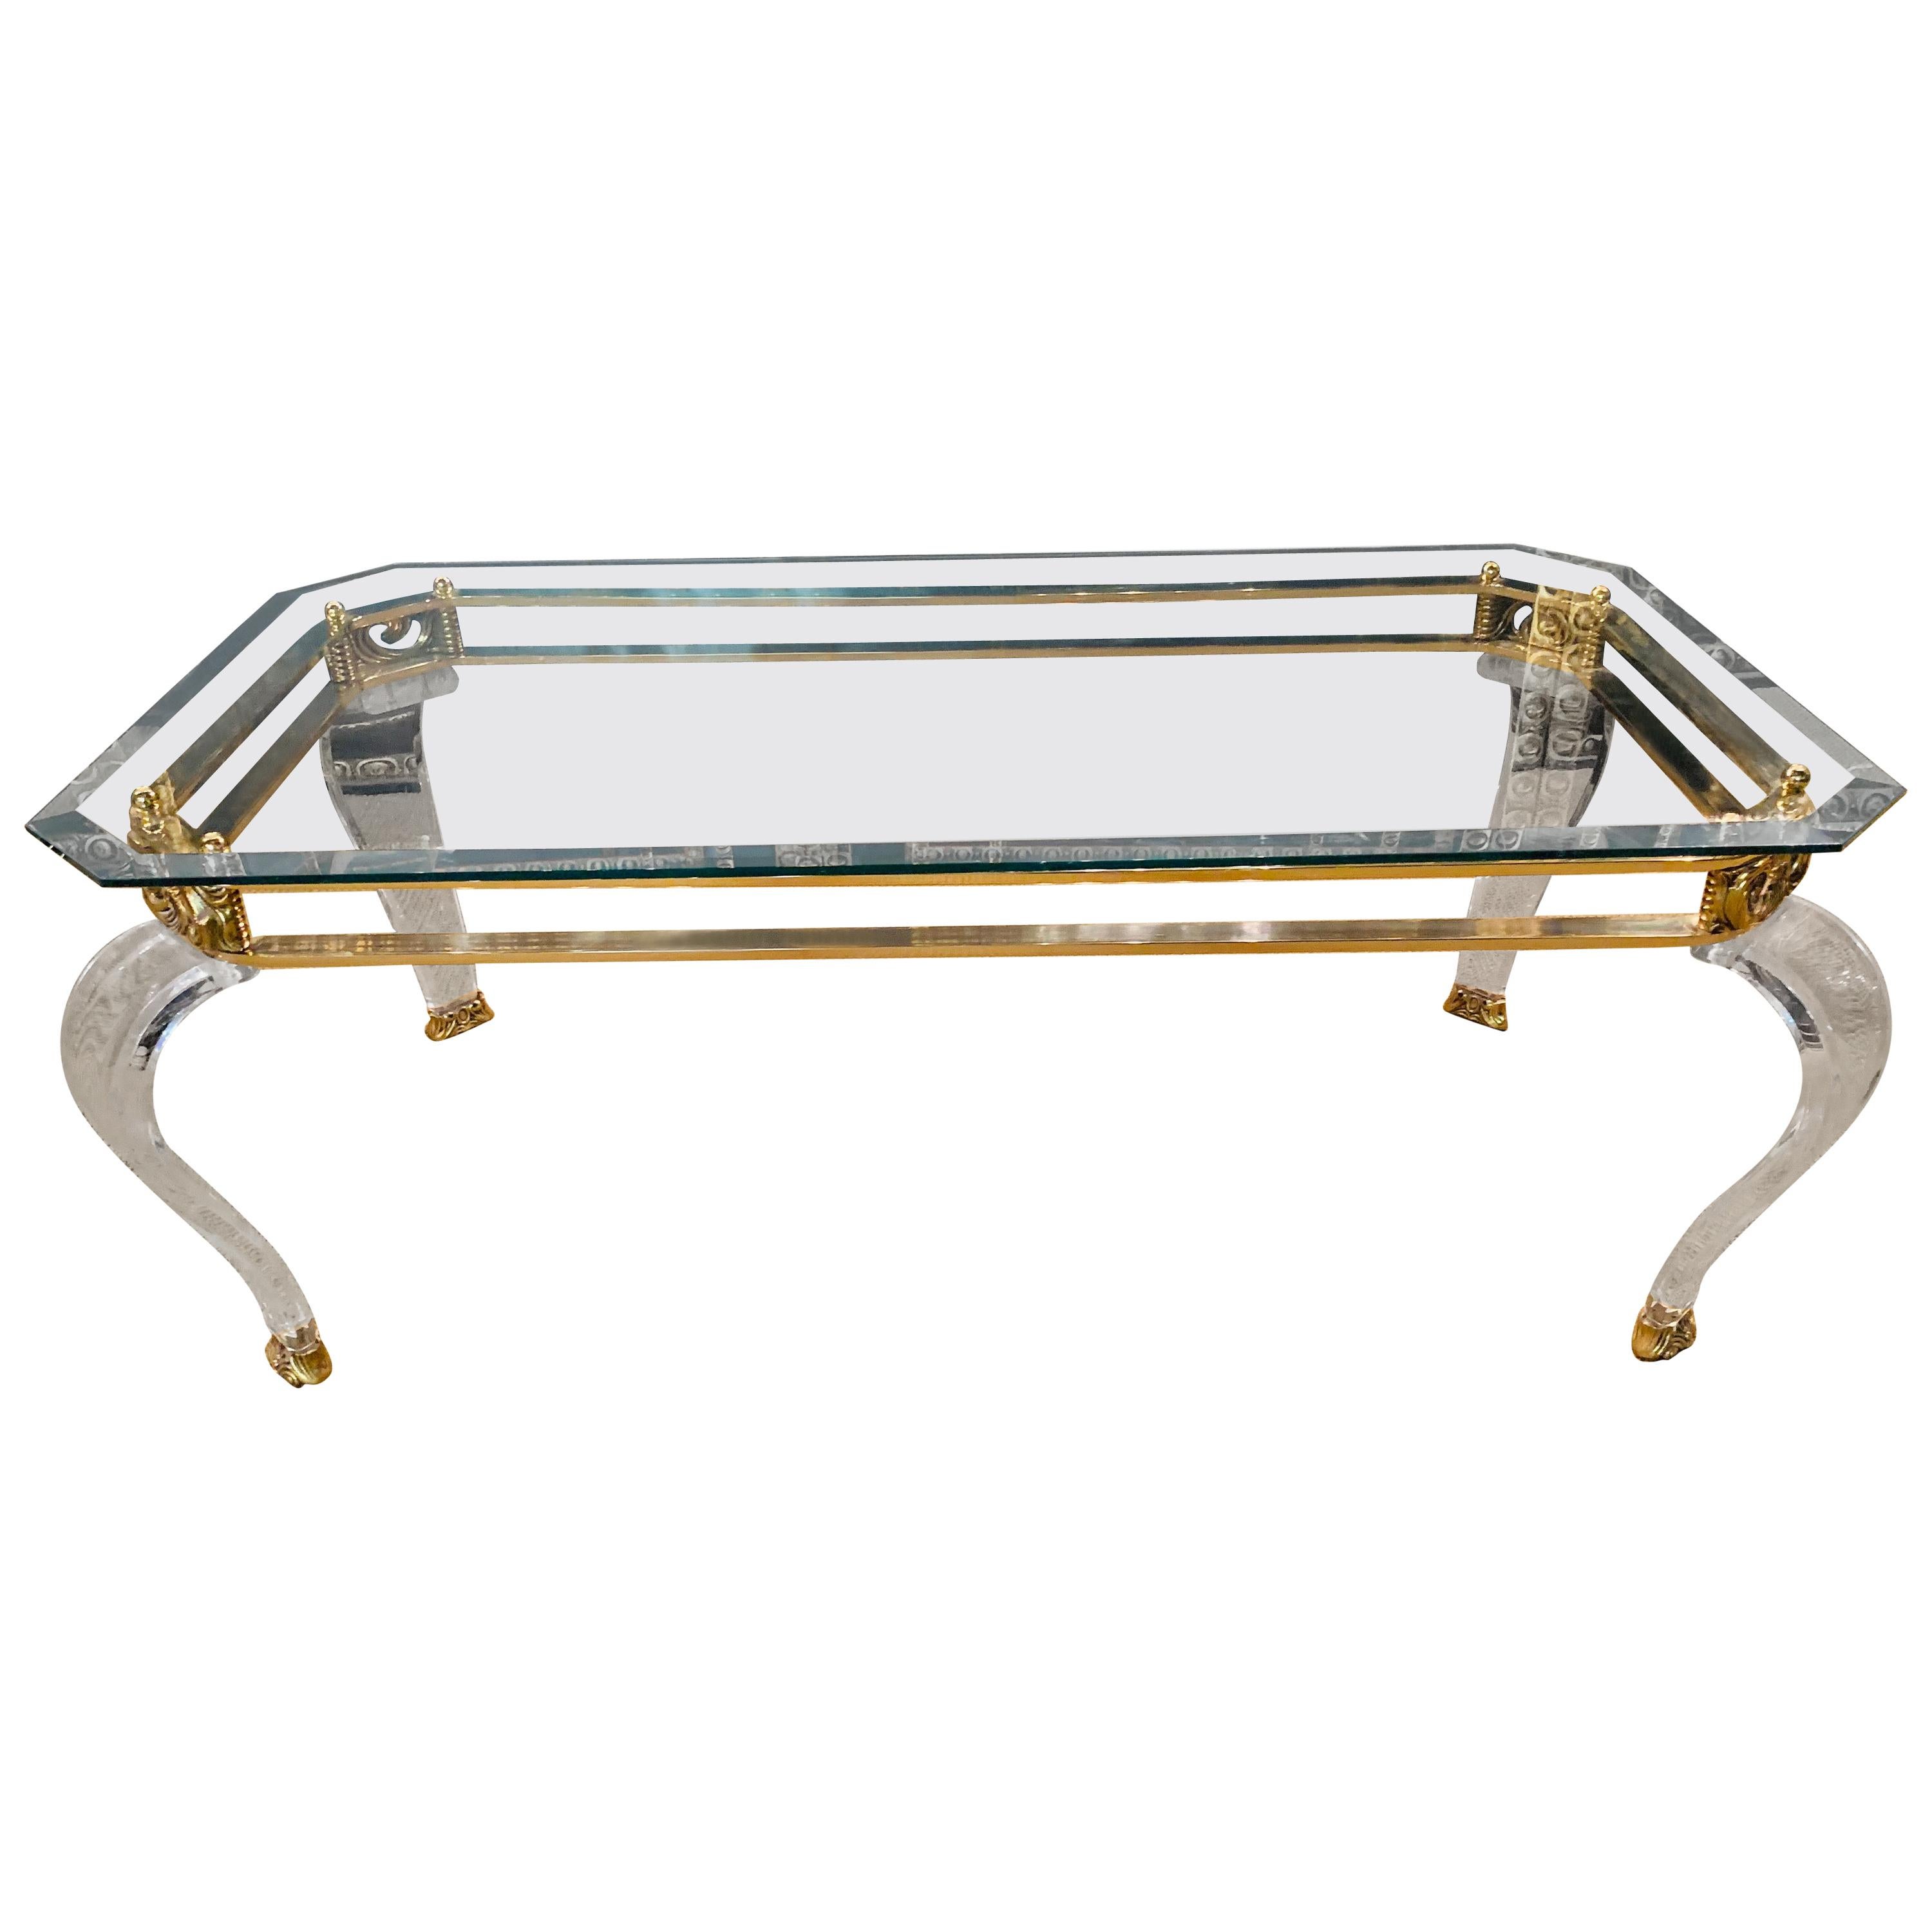 Luxury Table Acrylic with Brass Curved Legs in Acrylic High Quality